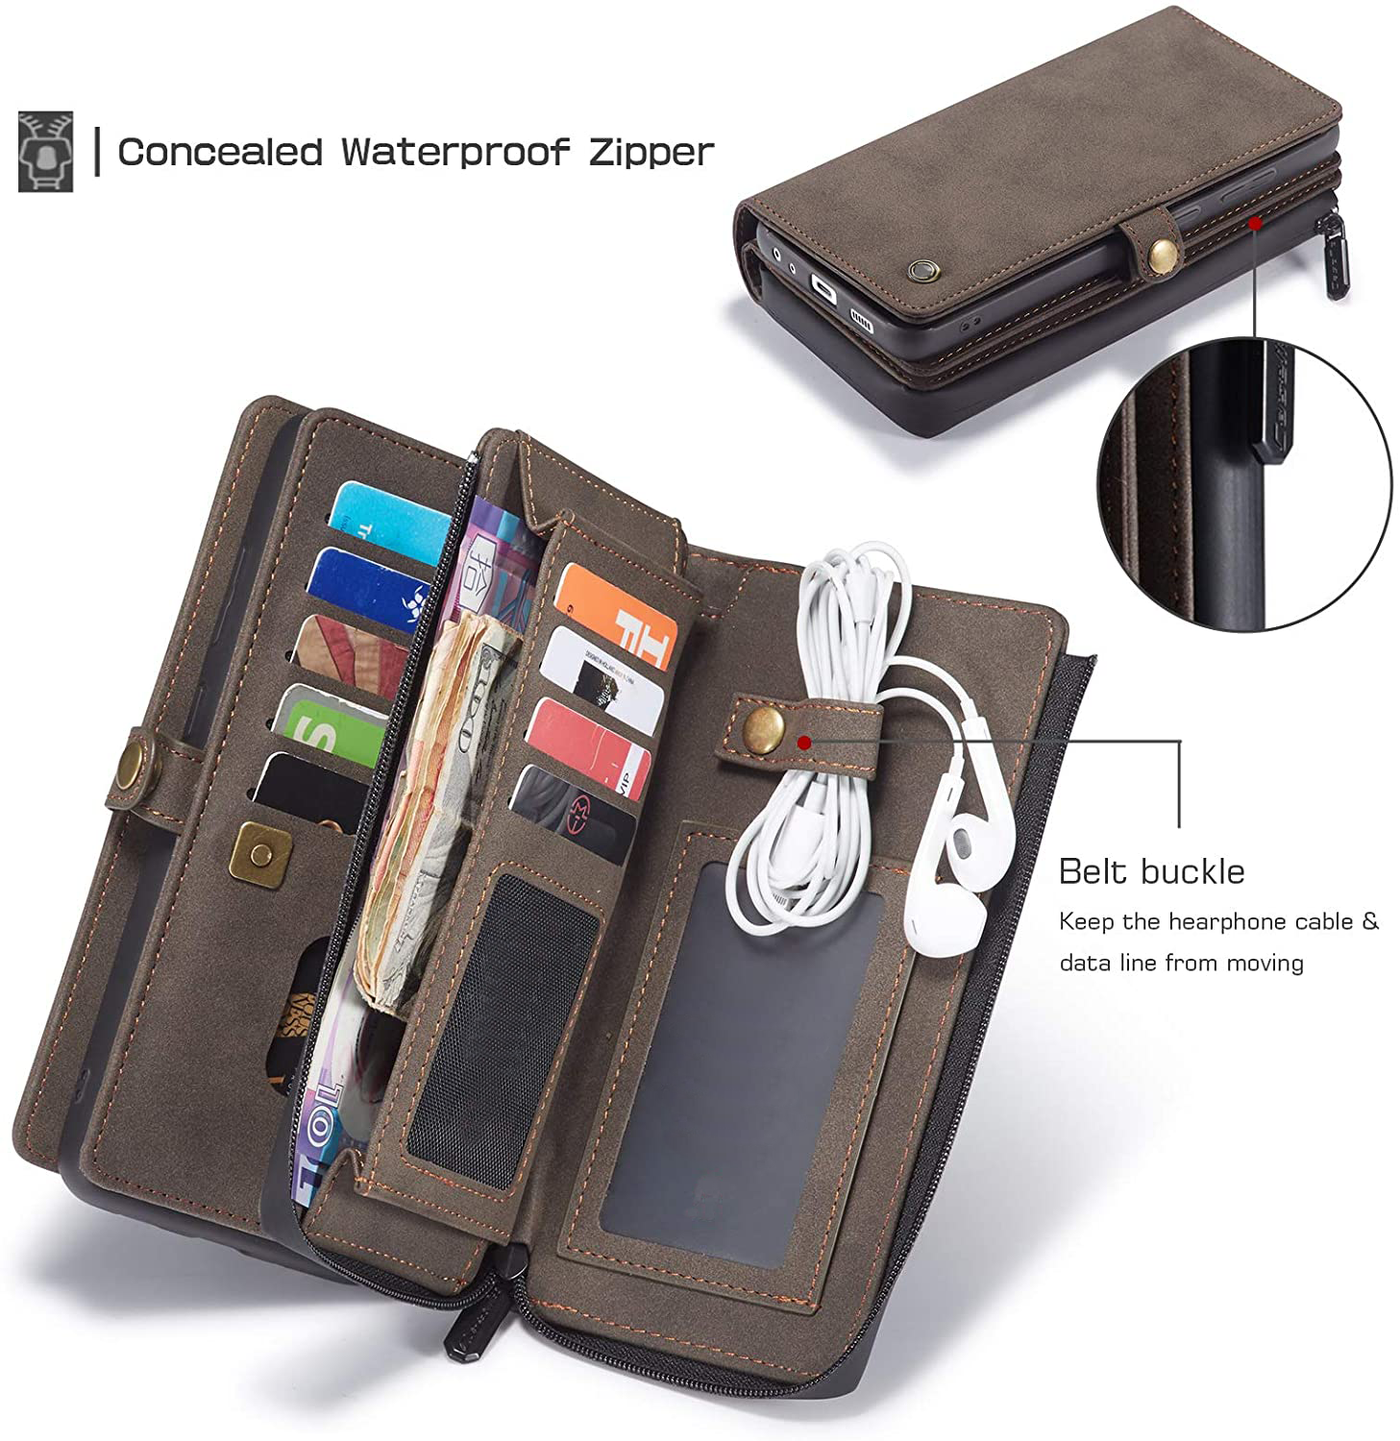 Oneplus Nord 2 full body protection Leather Wallet flip case cover by Excelsior